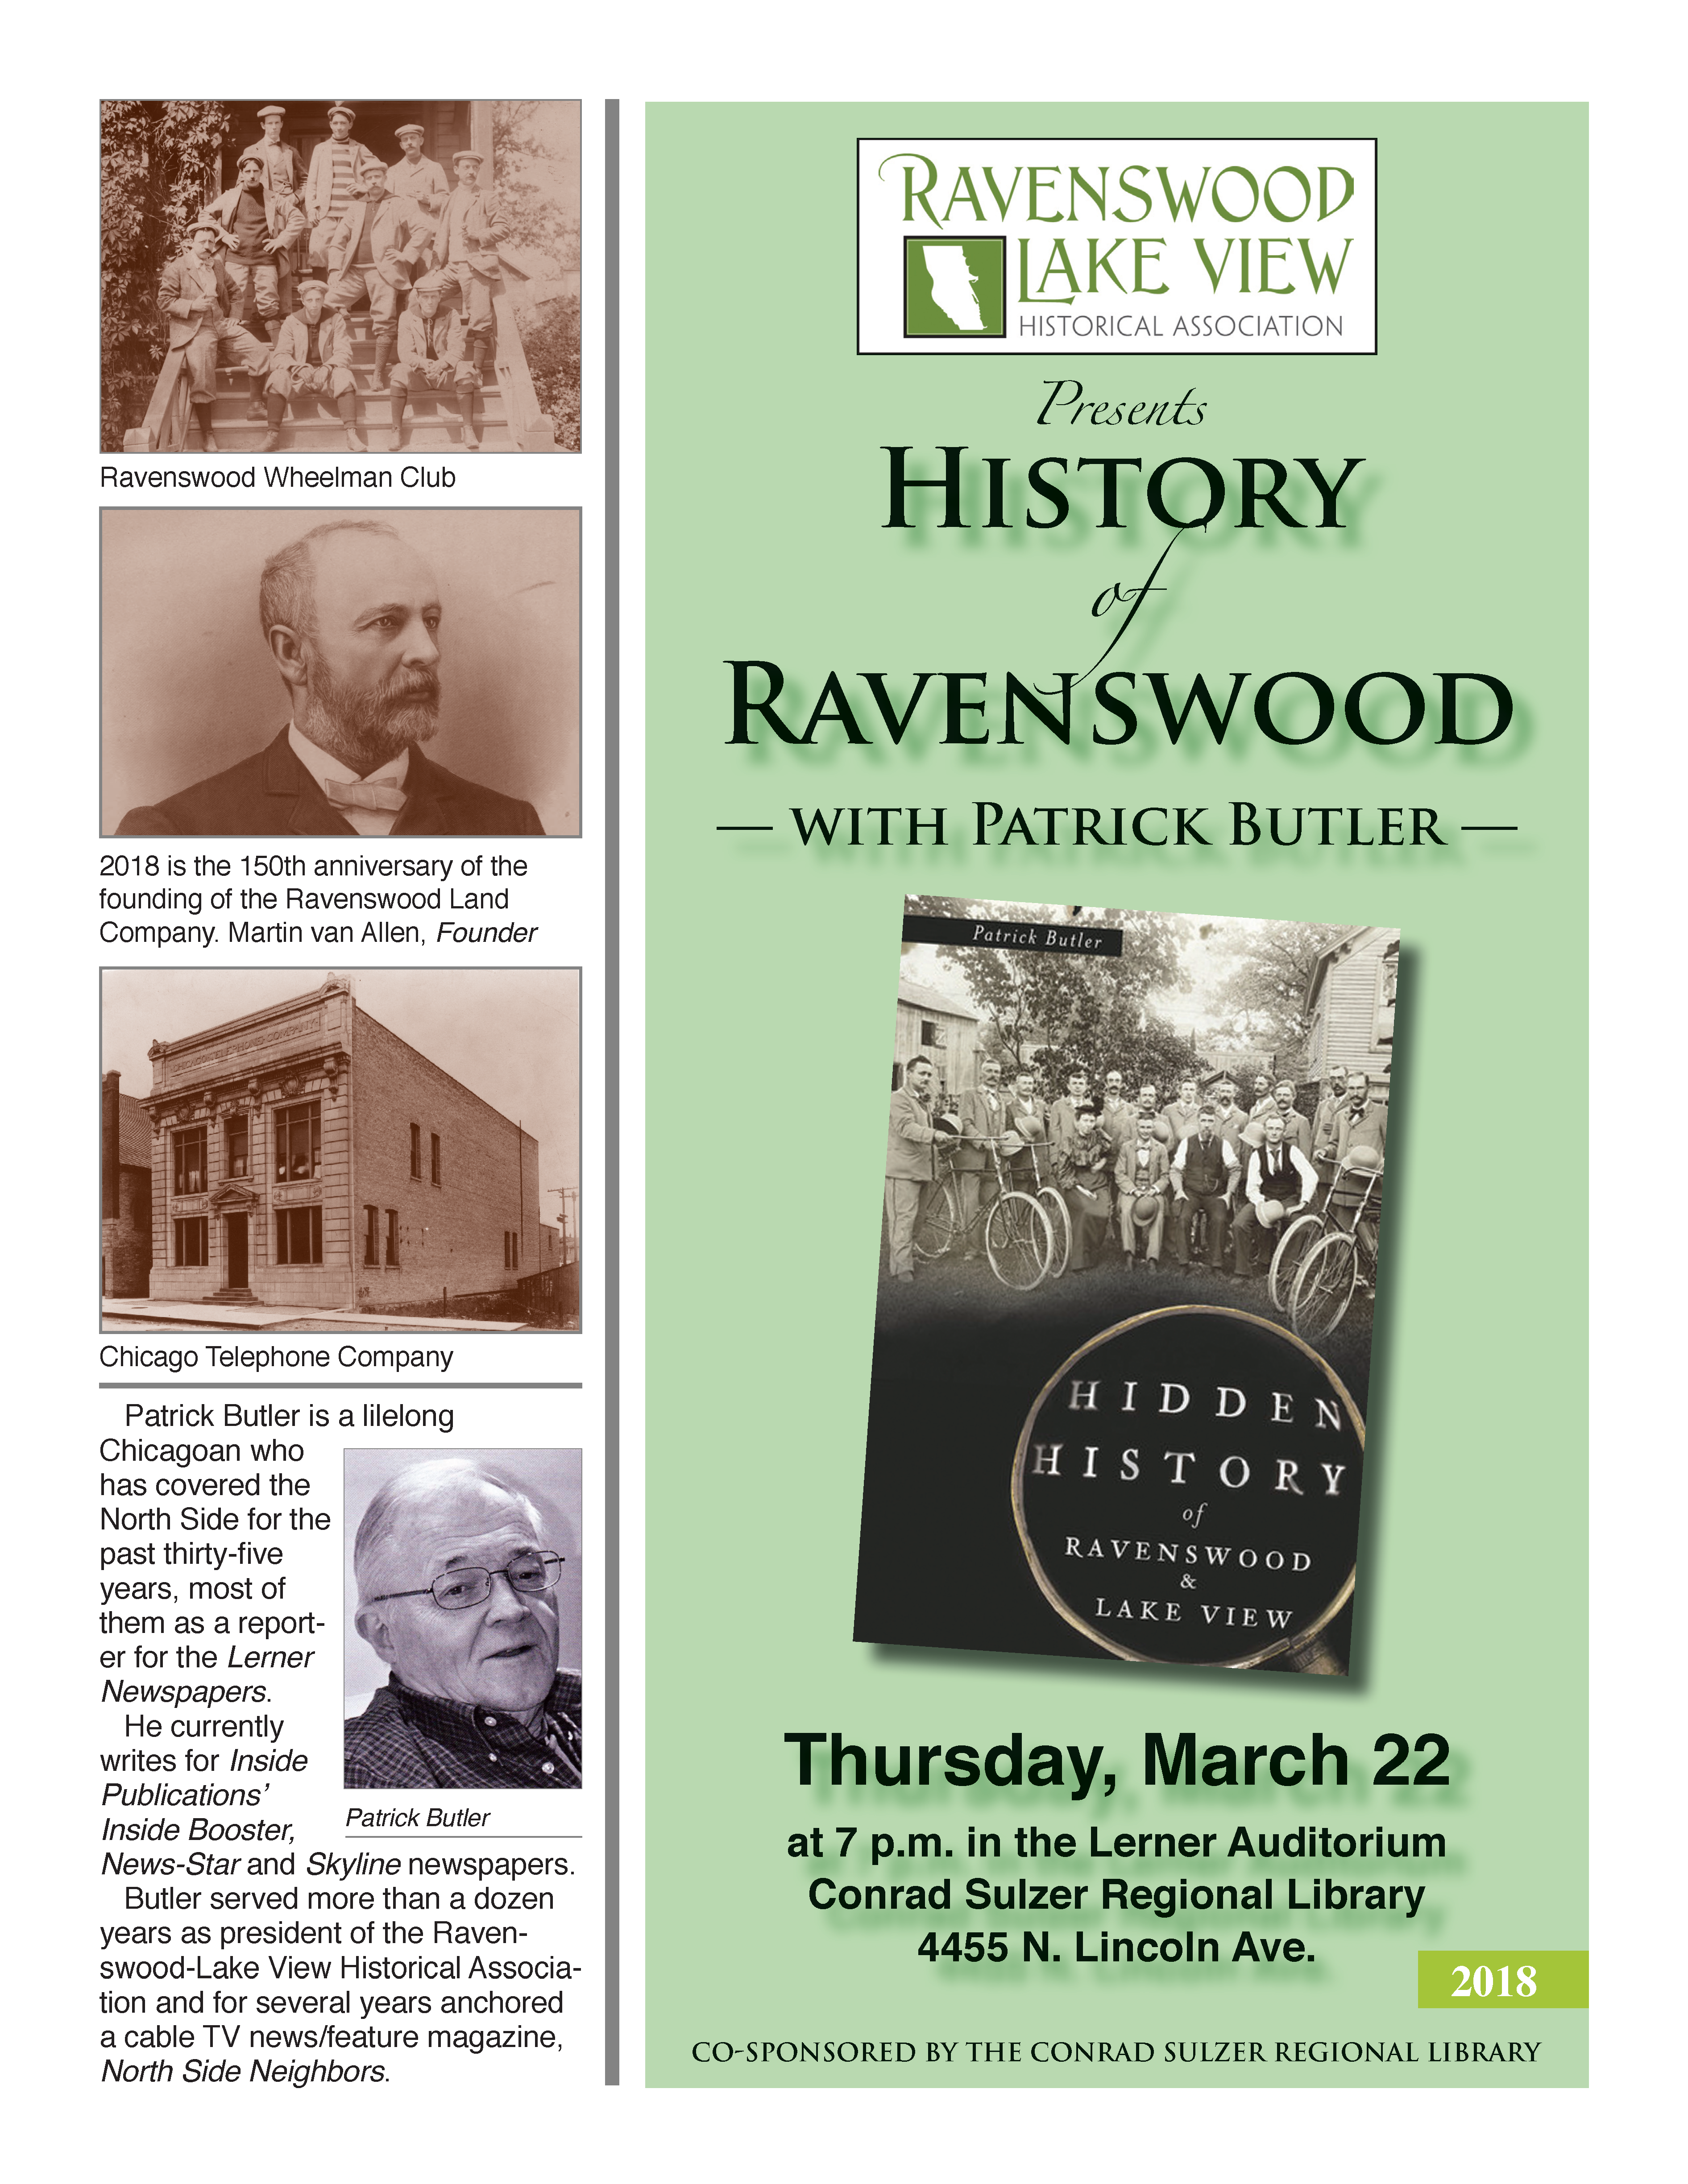 History of Ravenswood - Mar 22, 7pm - Lerner Auditorium, Conrad Sulzer Regional Library, 4455 N. Lincoln Ave.